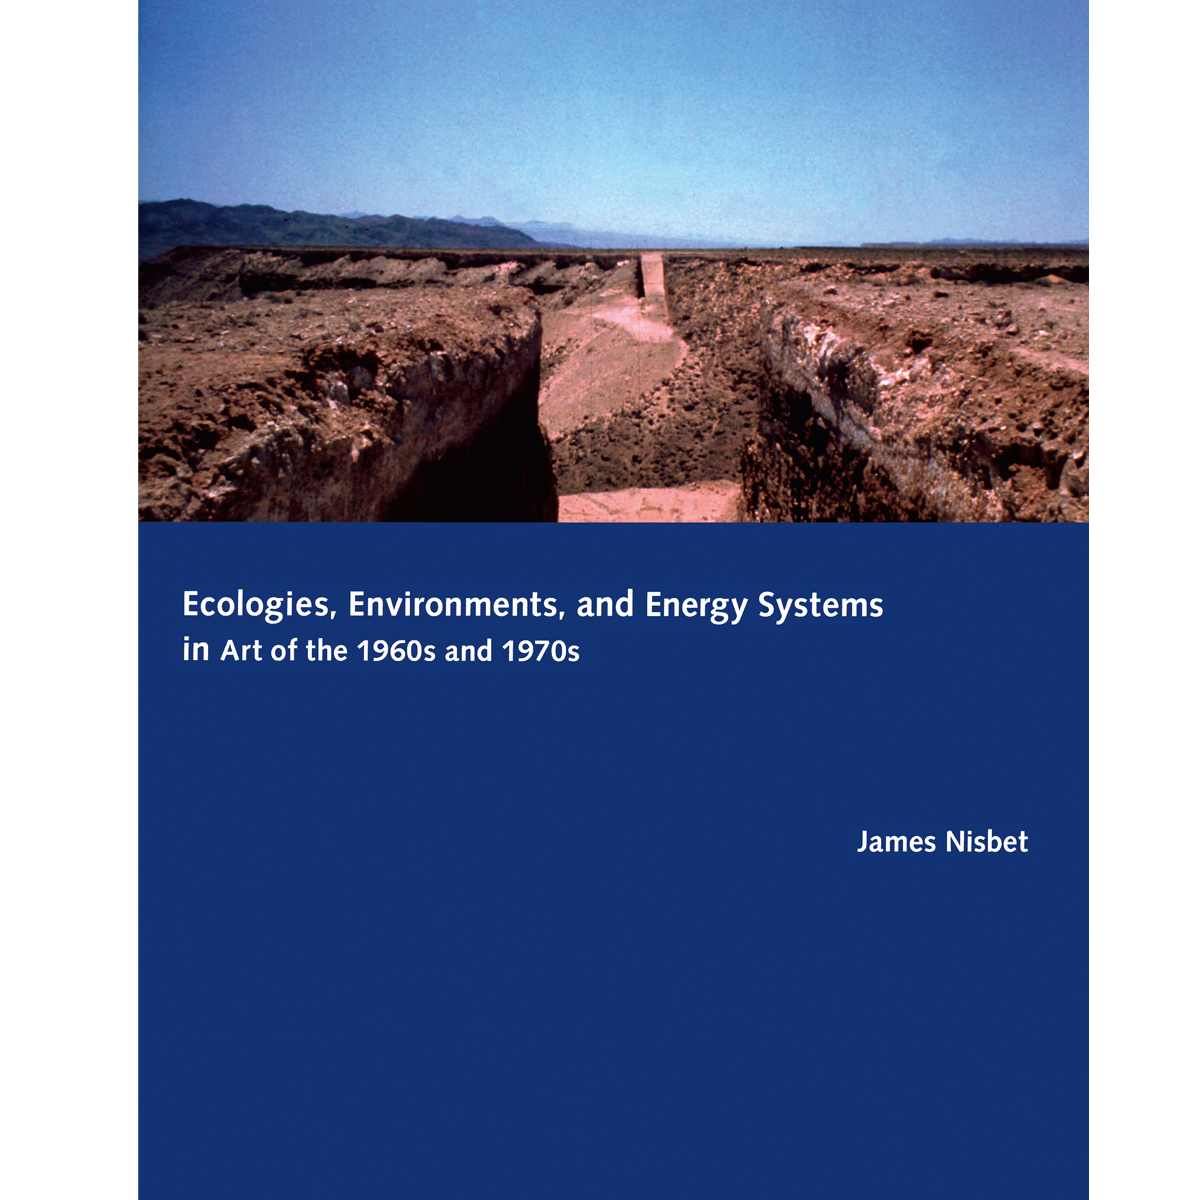 Ecologies, Environments, and Energy Systems in Art of the 1960s and 1970s